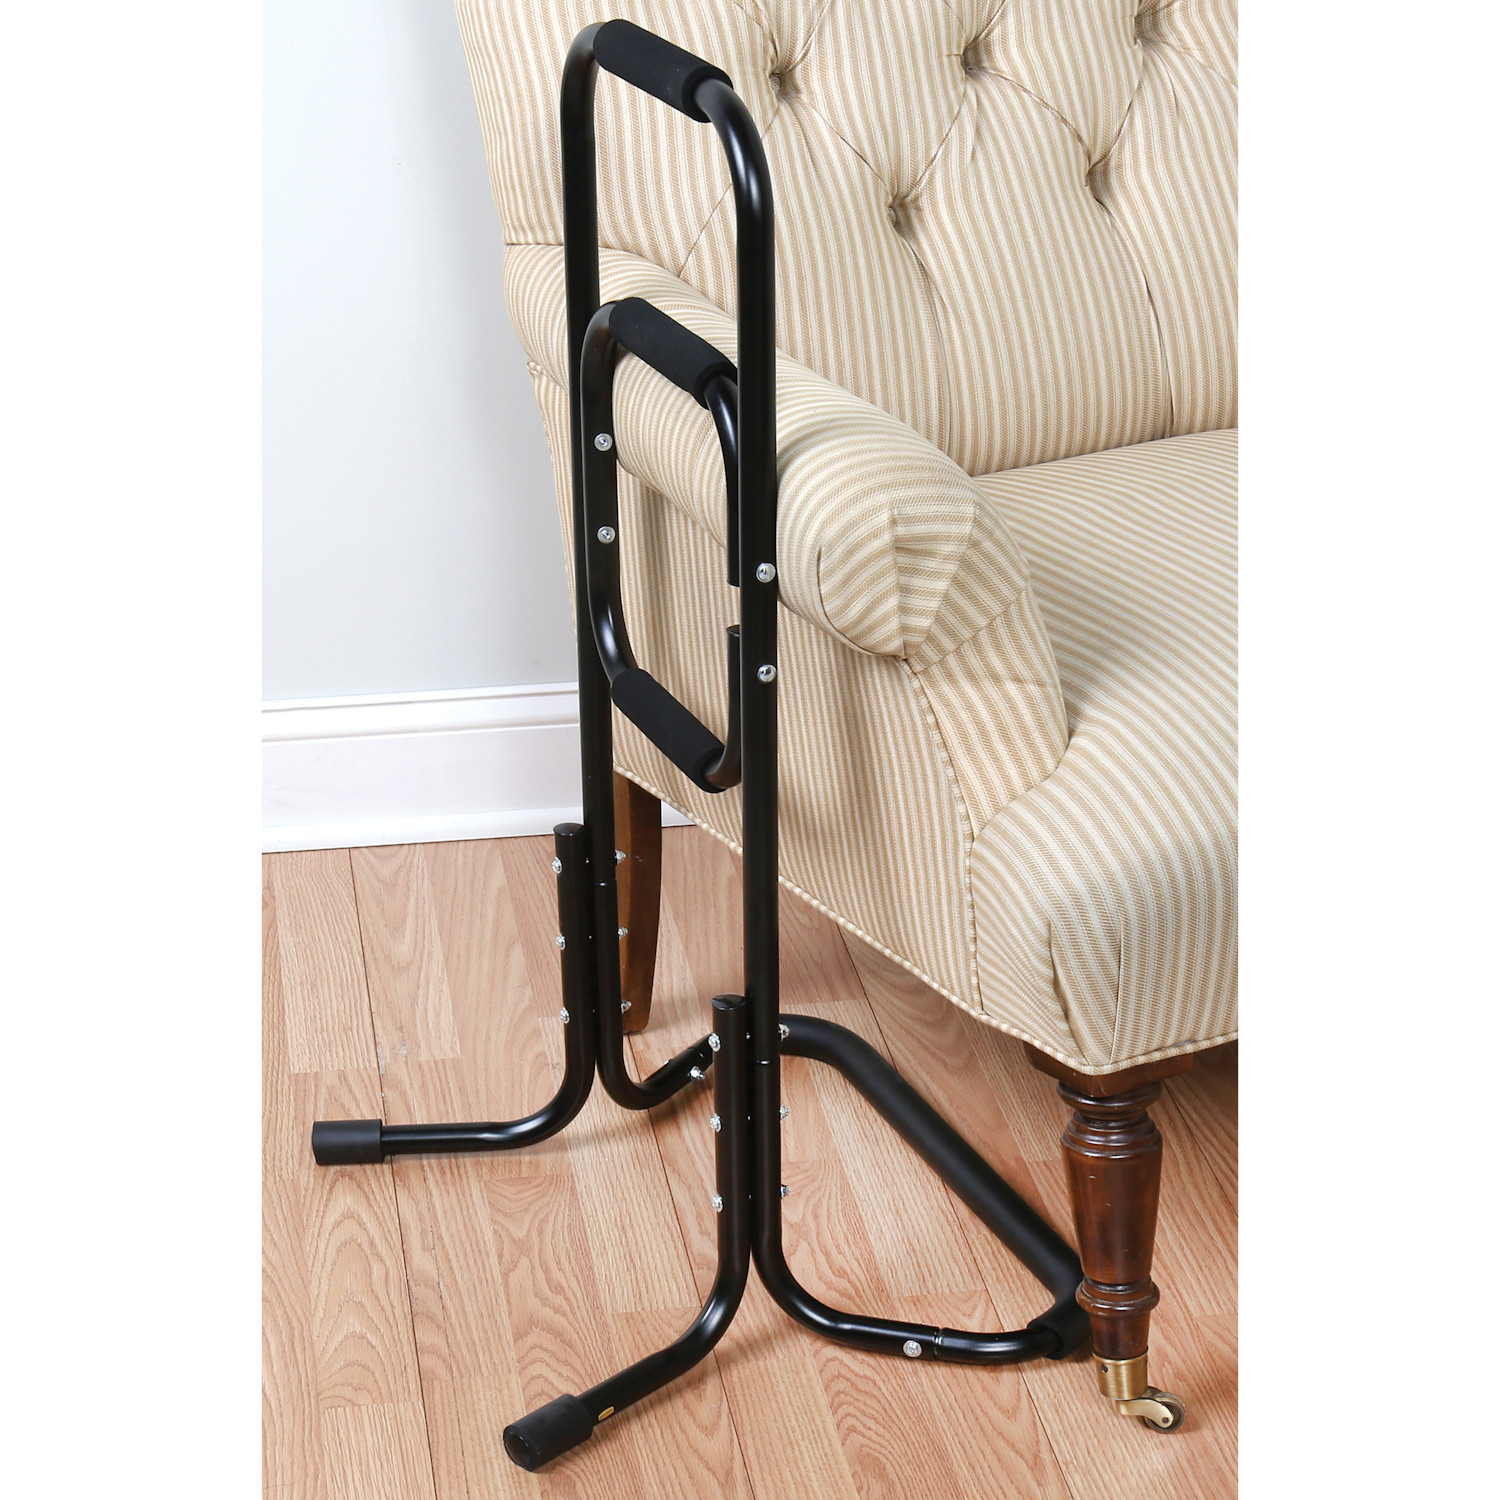 Portable Chair Stand Assist - Helps Rise from Seated Position